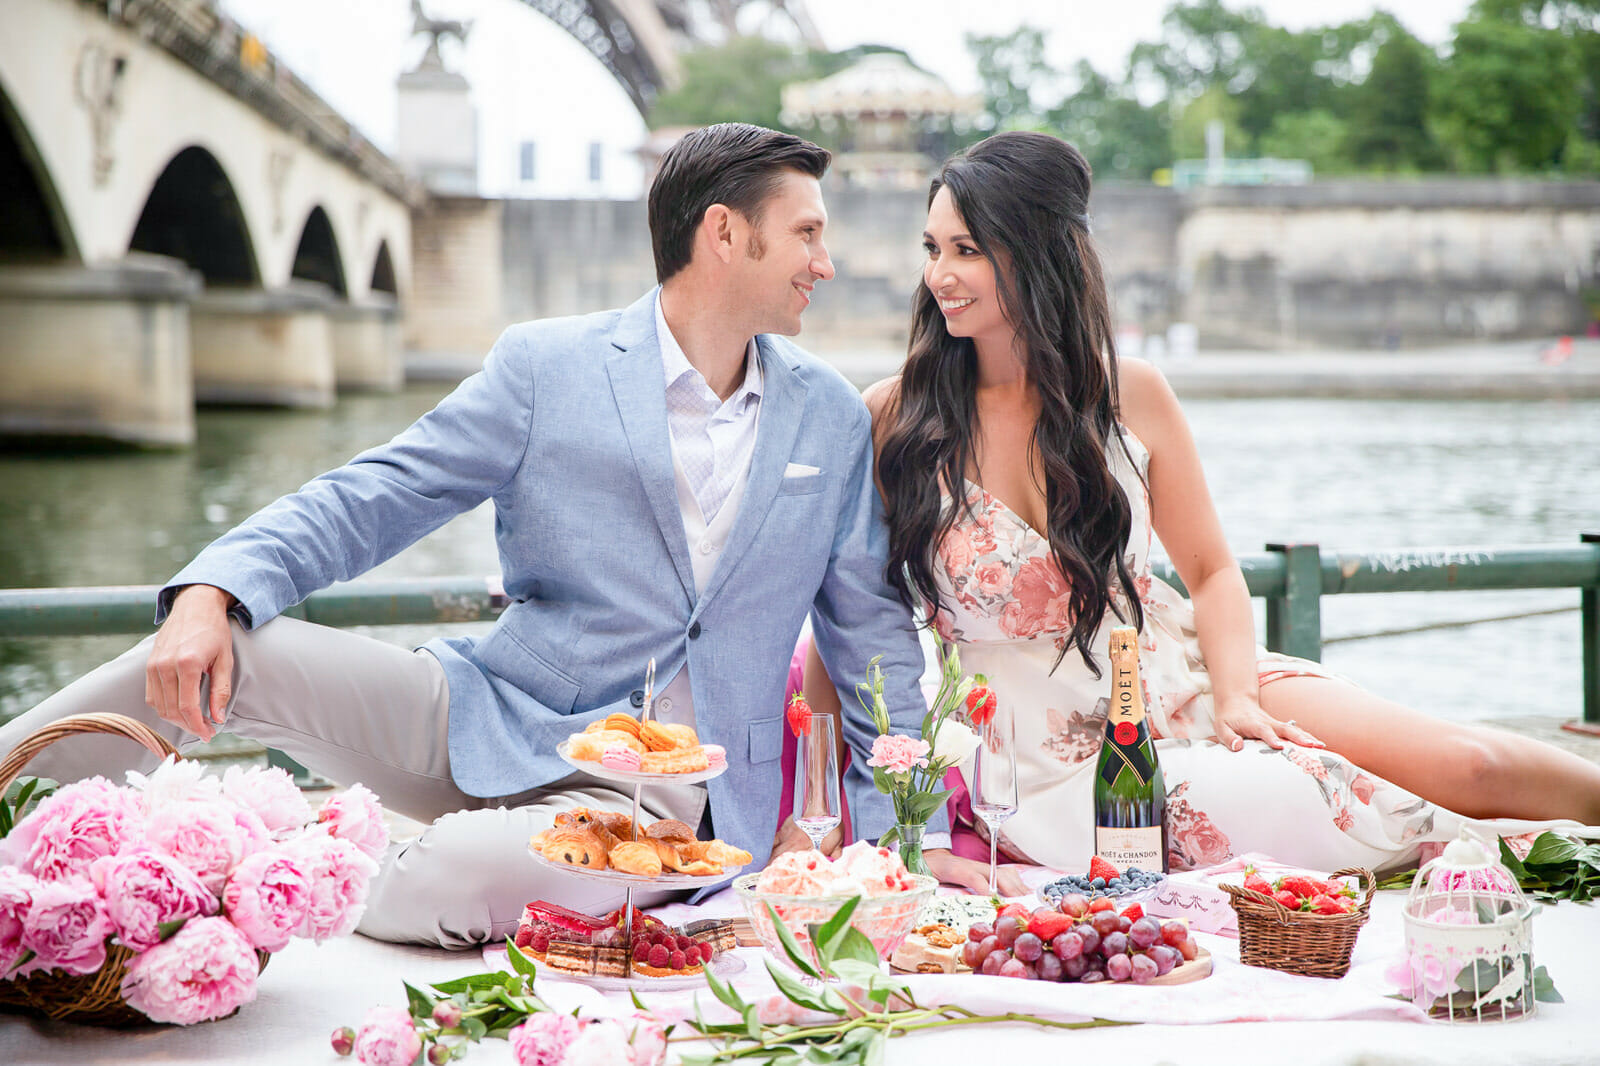 Creative Paris proposal ideas with luxury picnic at the Eiffel Tower